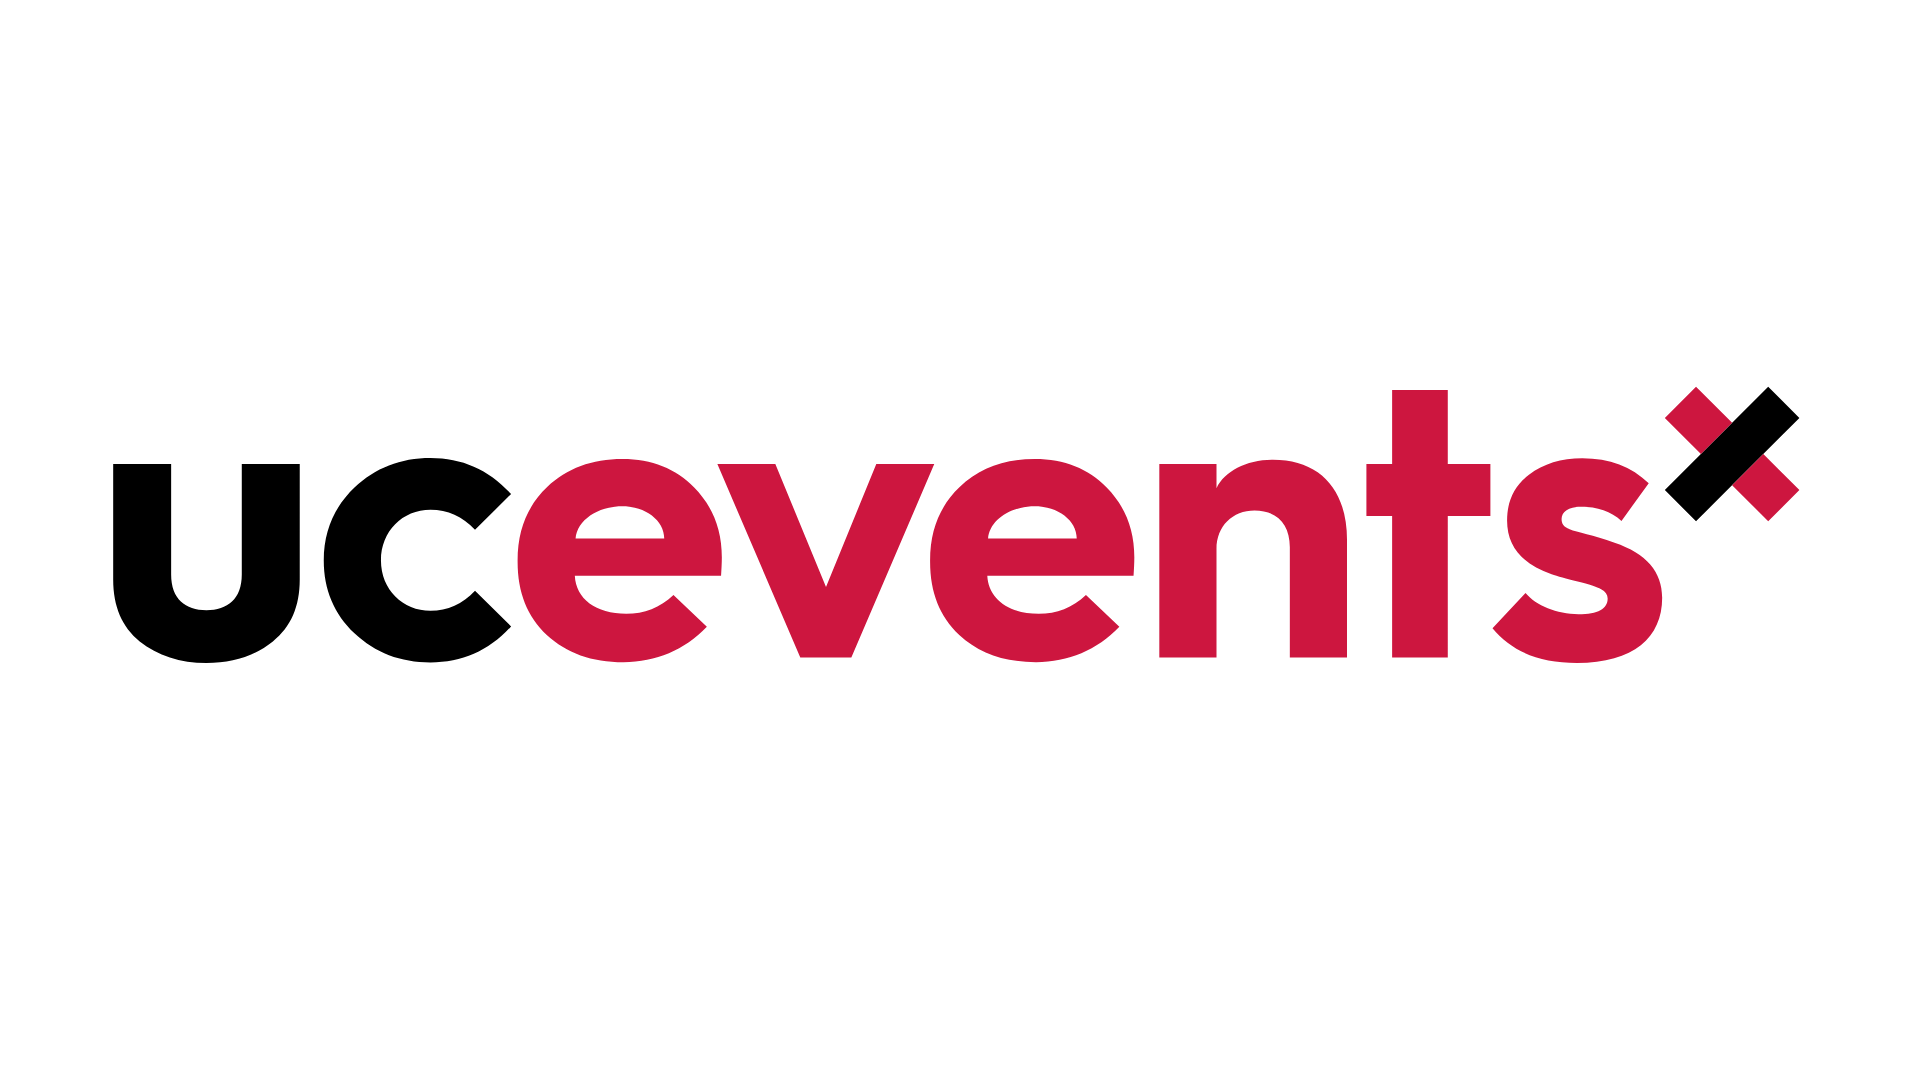 The word 'UCEventsx' appears as a logo. The 'UC' portion appears in black while the 'events' portion appears in red. The 'x' is indexed above the 's' of 'events' and is both black and red. 